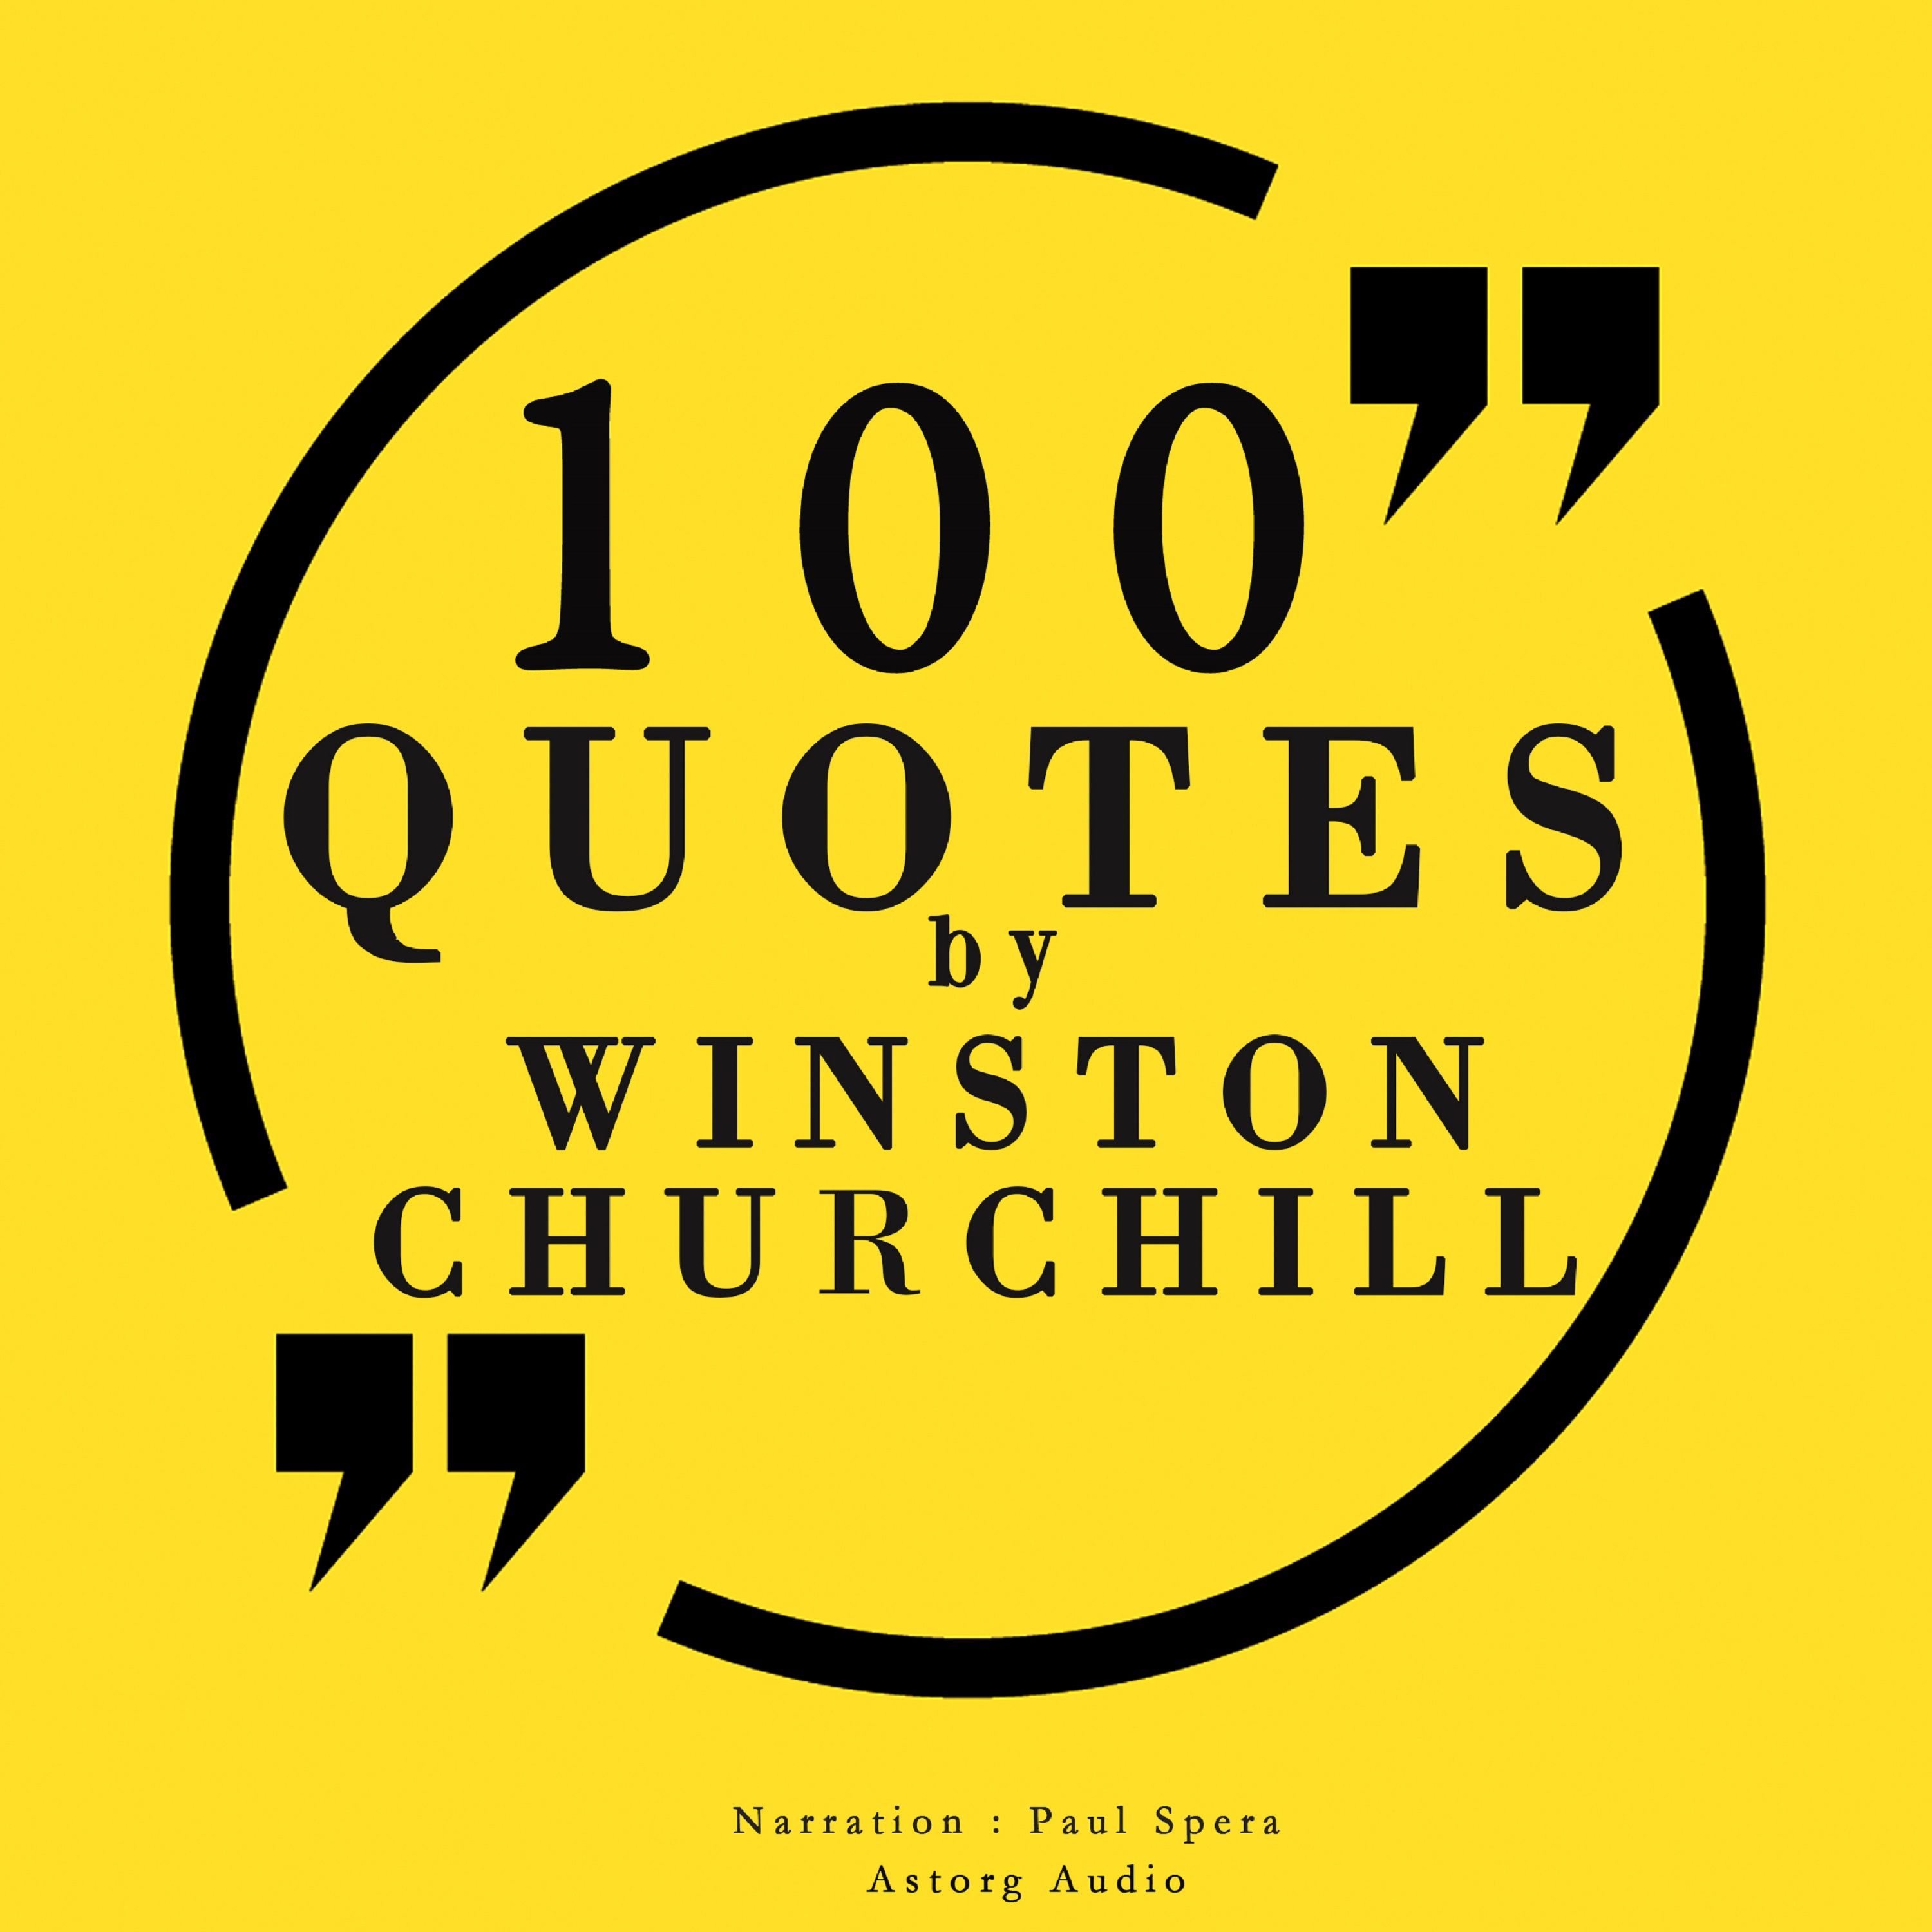 100 Quotes by Winston Churchill, lydbog af Winston Churchill